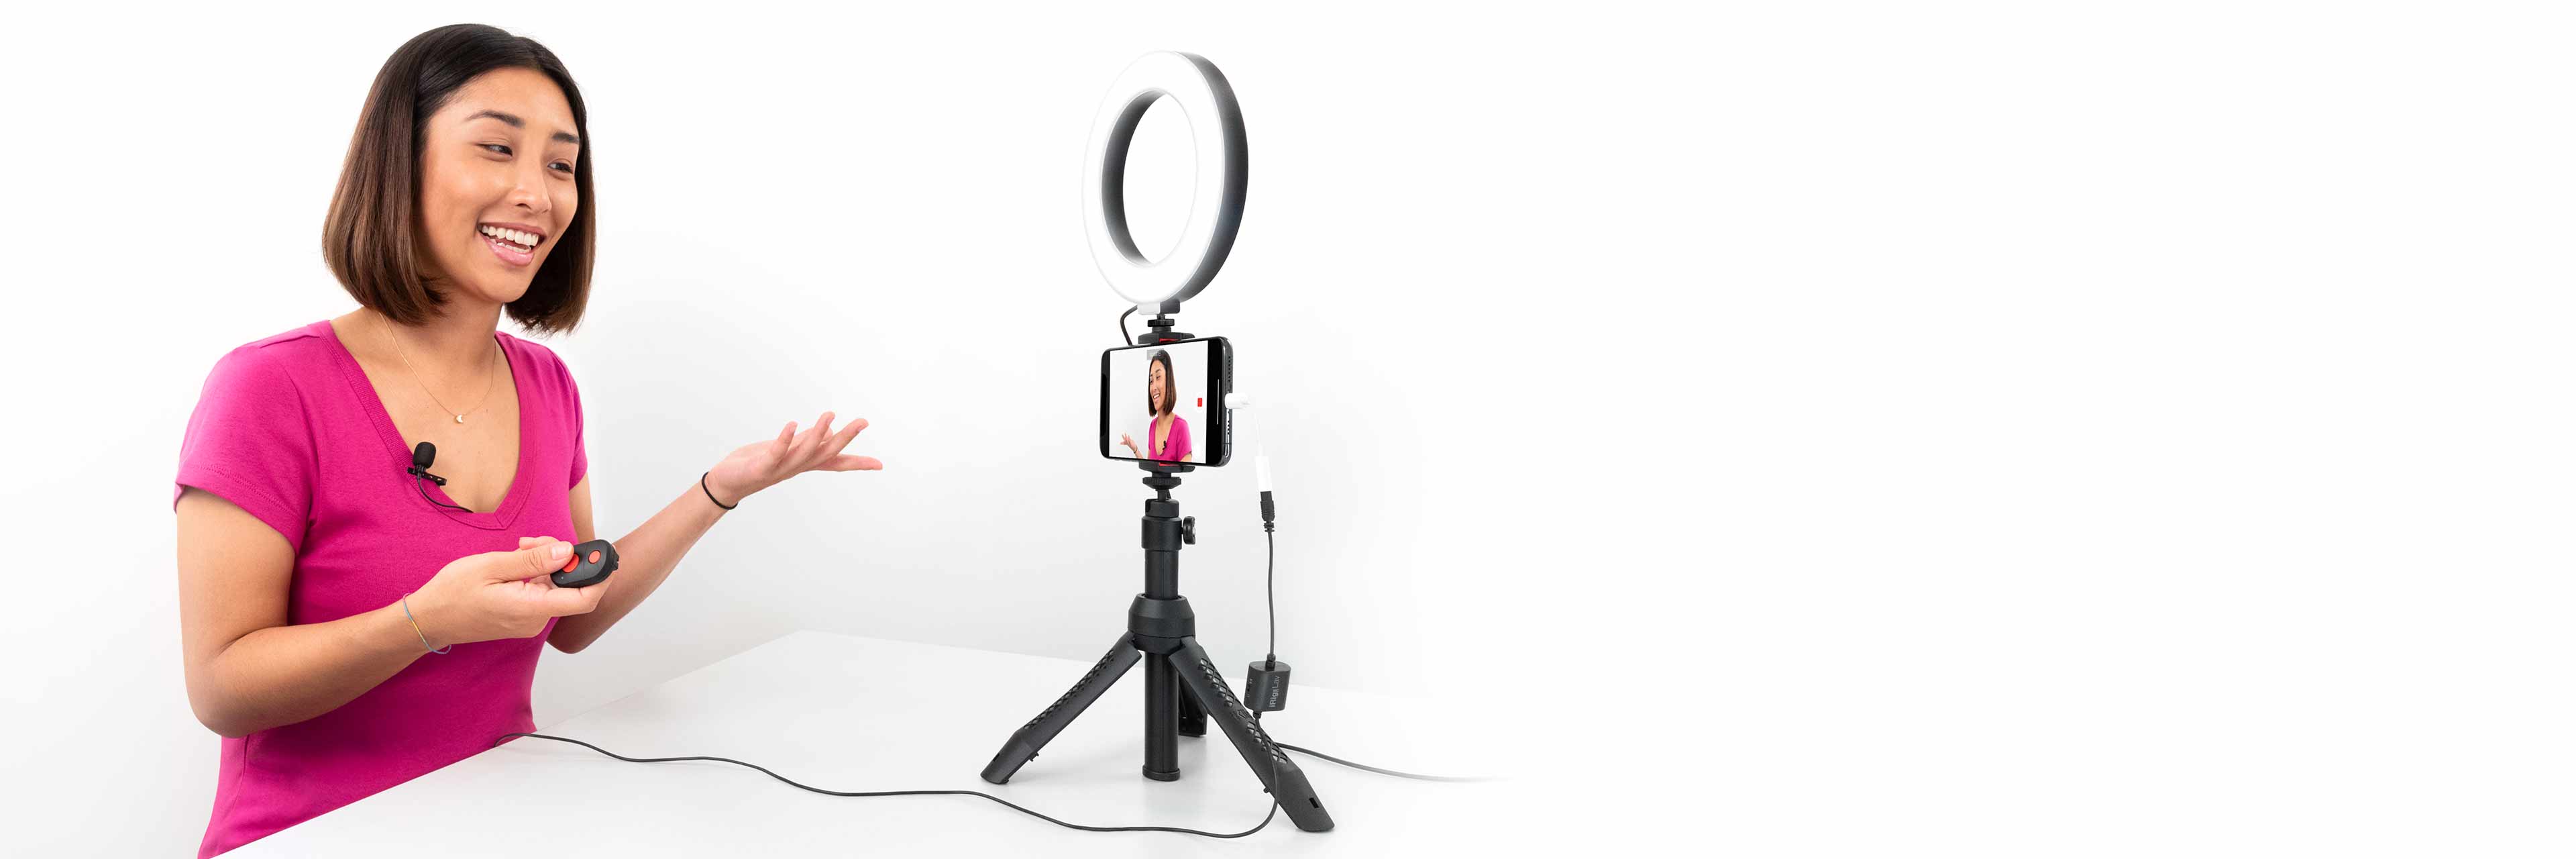 IK Multimedia iRig Video Creator HD Bundle Professional Video and Streaming  Kit with Ring Light